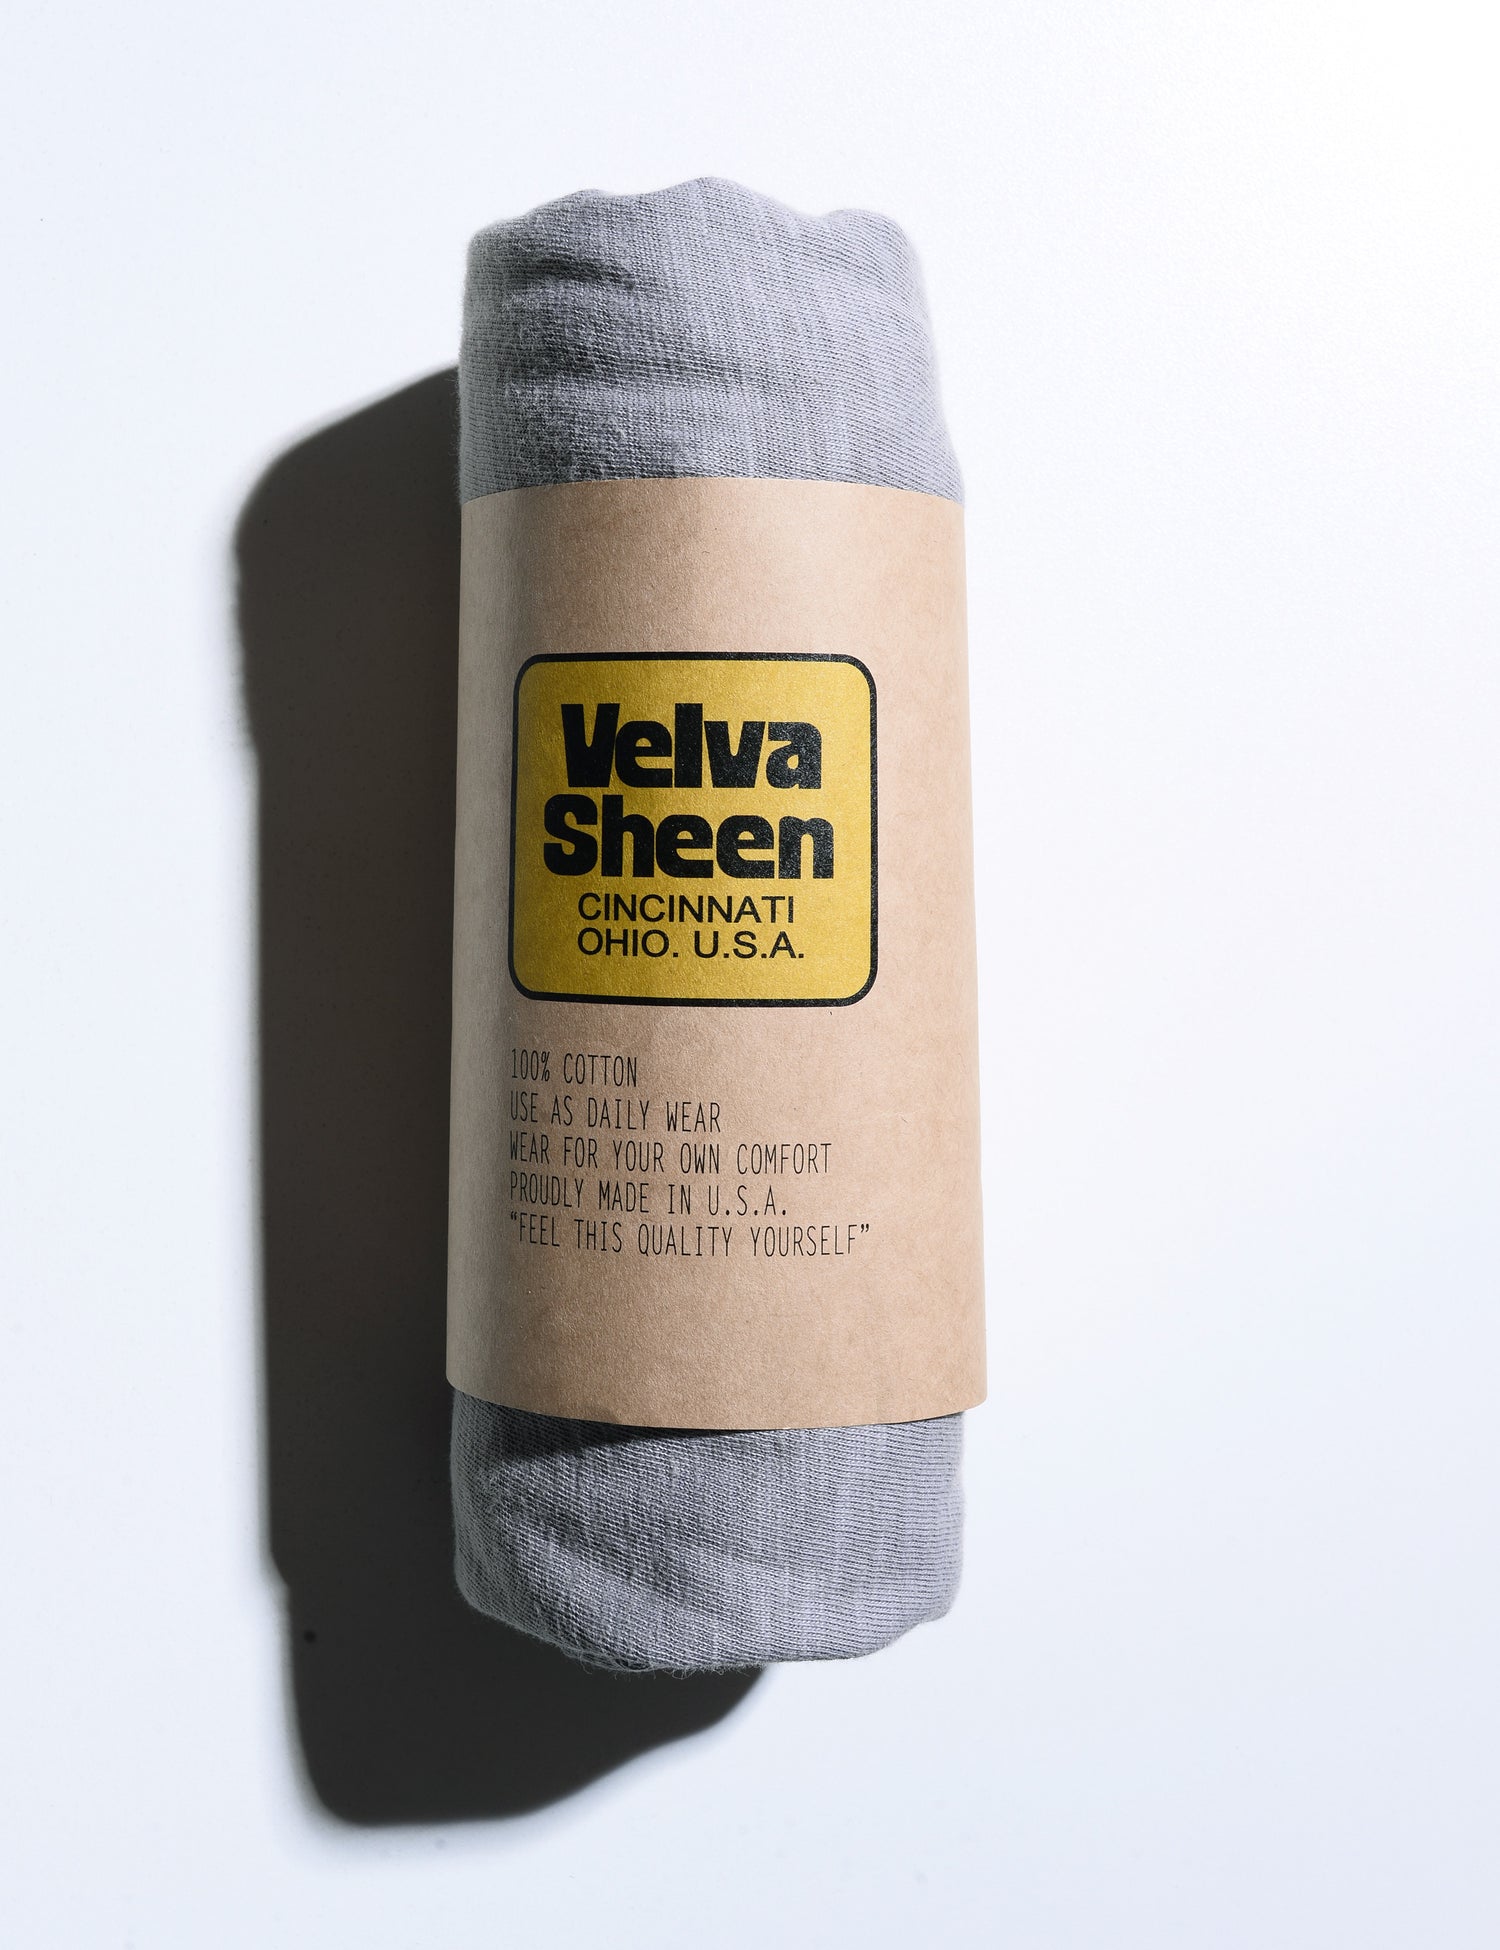 Velva Sheen Long Sleeve Crewneck T-Shirt in Gray rolled in its paper sleeve